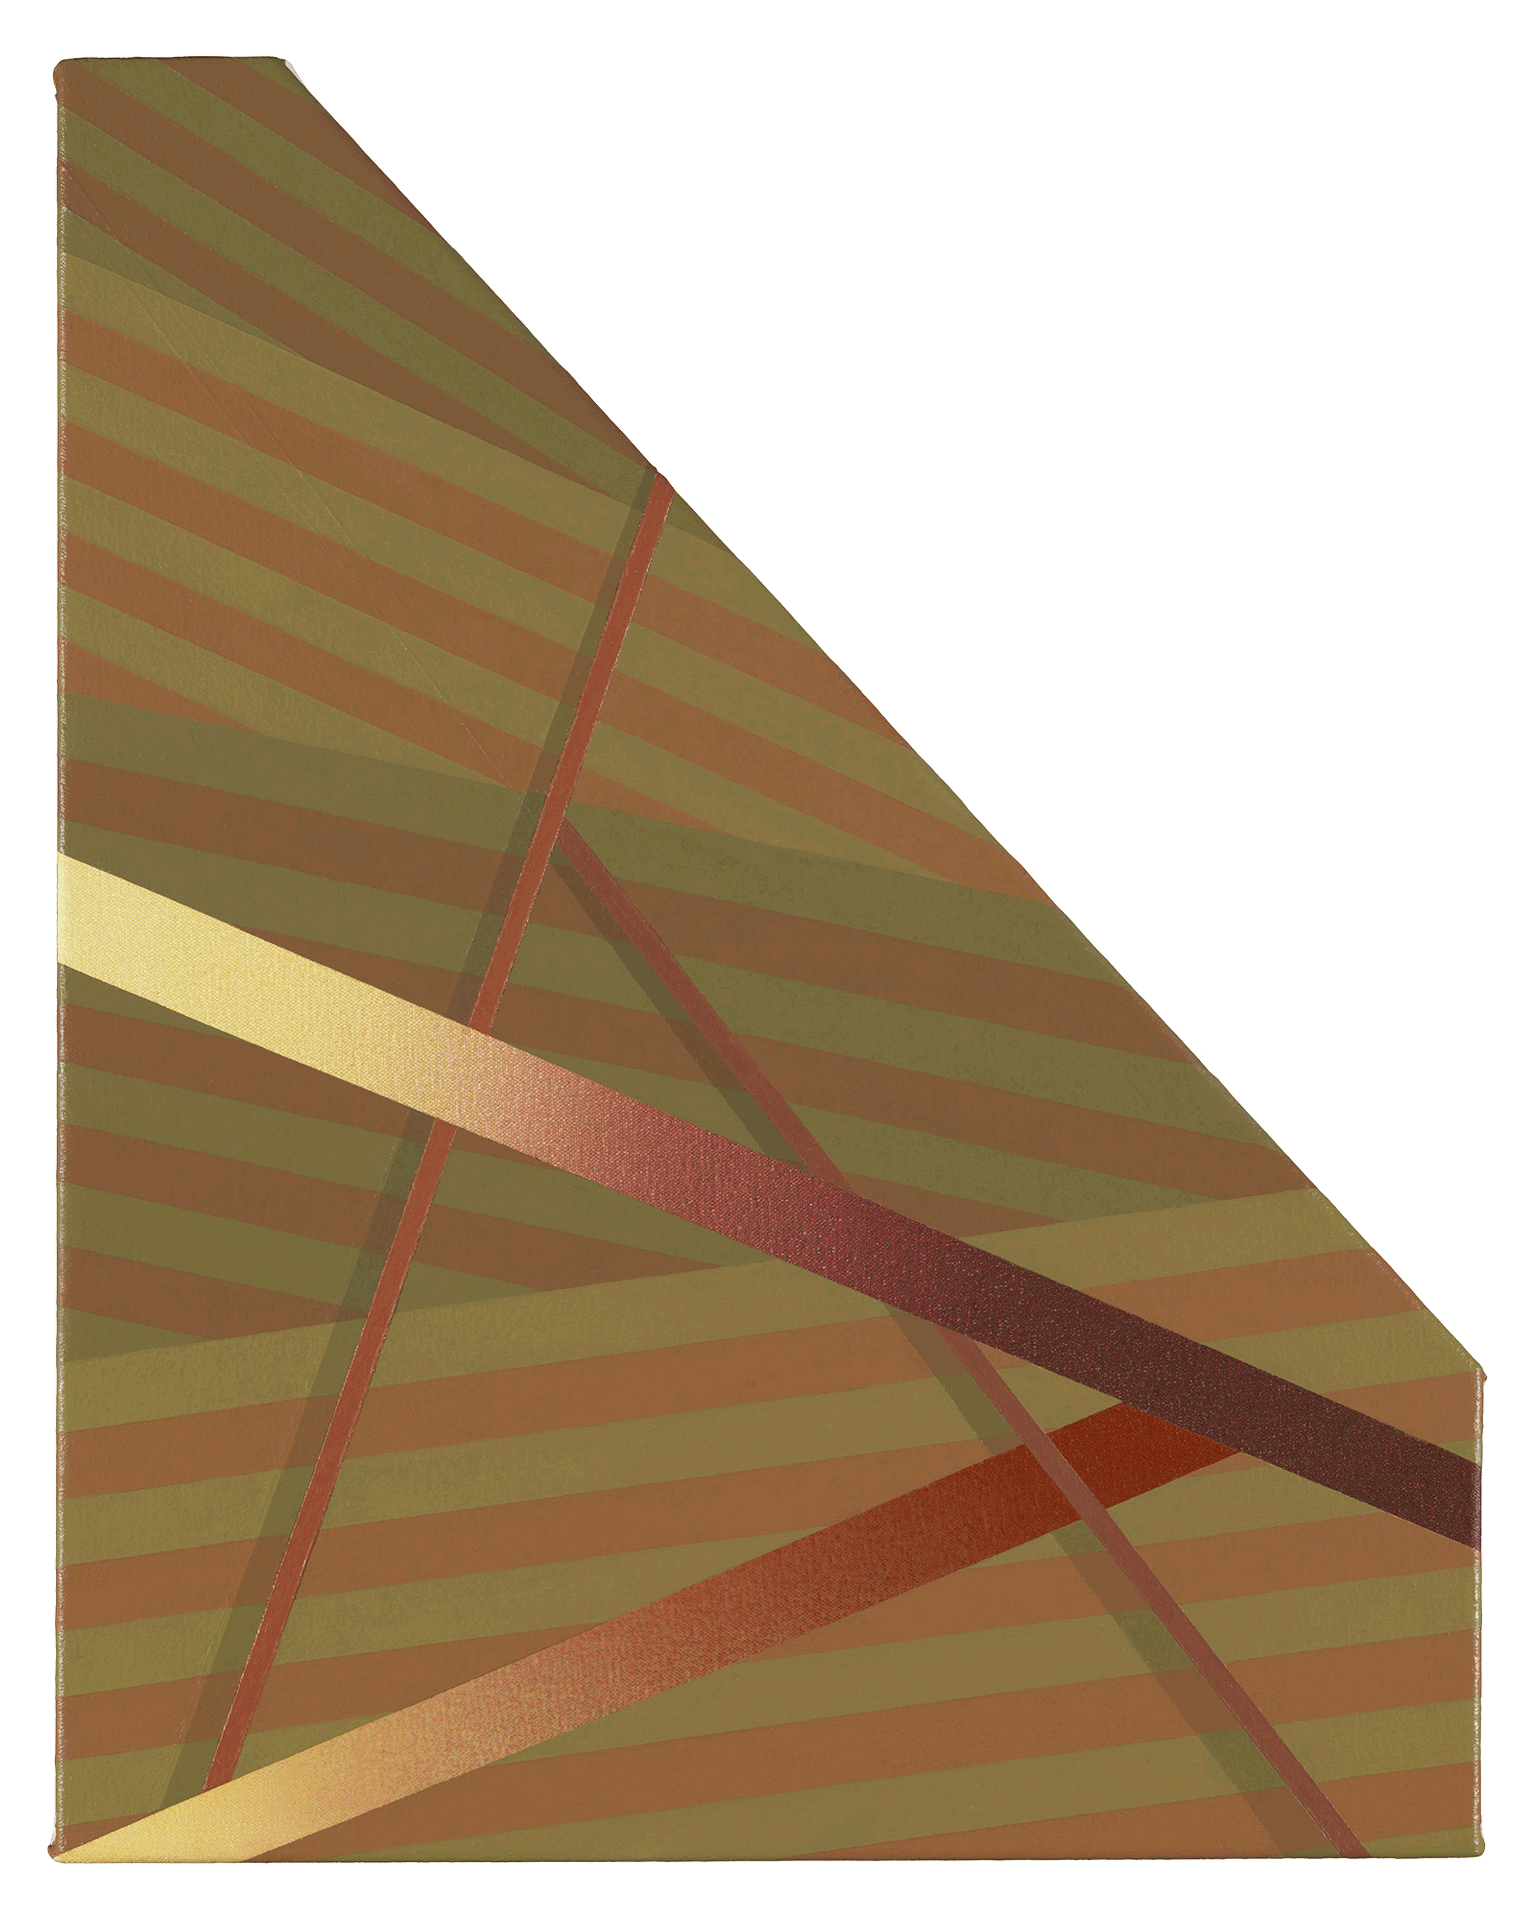 A painting by Tomma Abts, titled L√ºko, dated 2015.